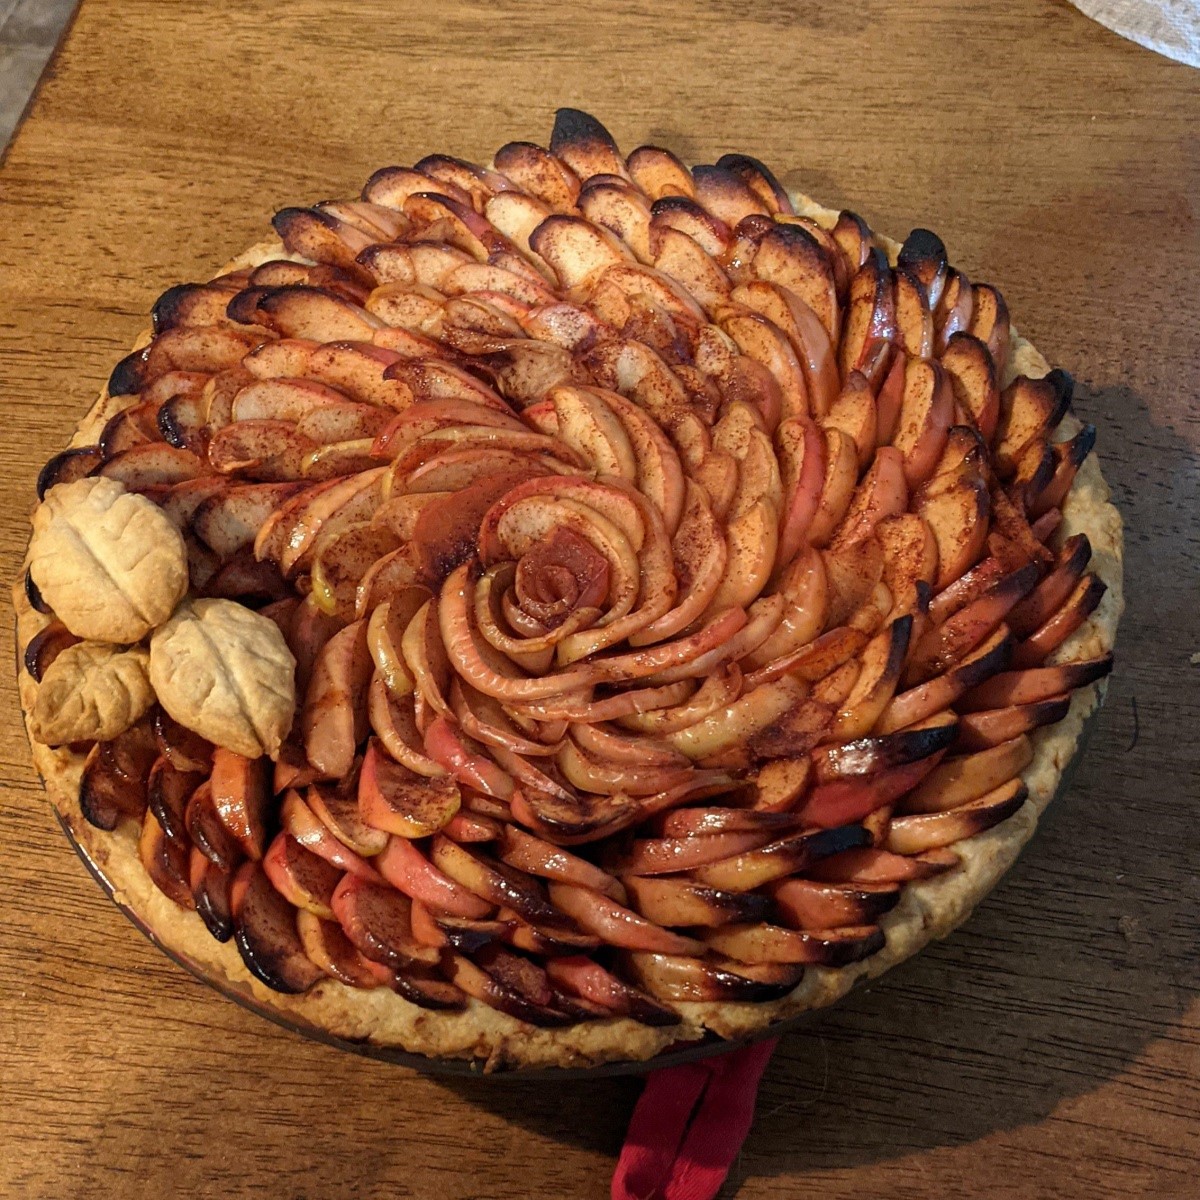 My Fiancé Made This Incredible Rose Style Apple Pie. It's As Delicious As It Looks, And I Had To Show It Off